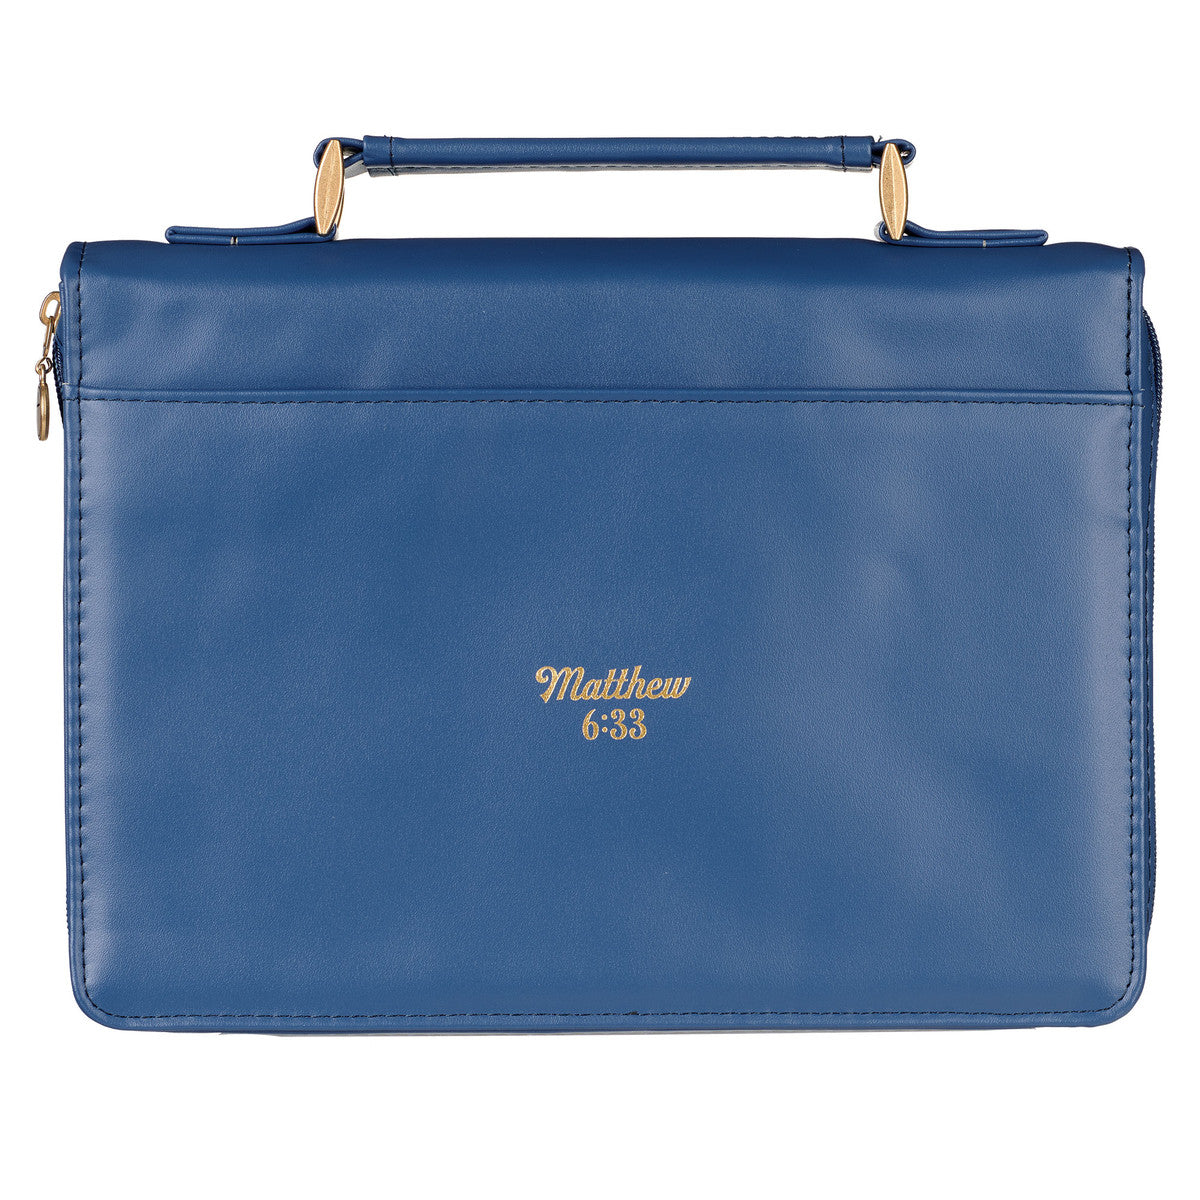 The Kingdom of God Two-tone Blue Faux Leather Fashion Bible Cover - Matthew 6:33 - The Christian Gift Company